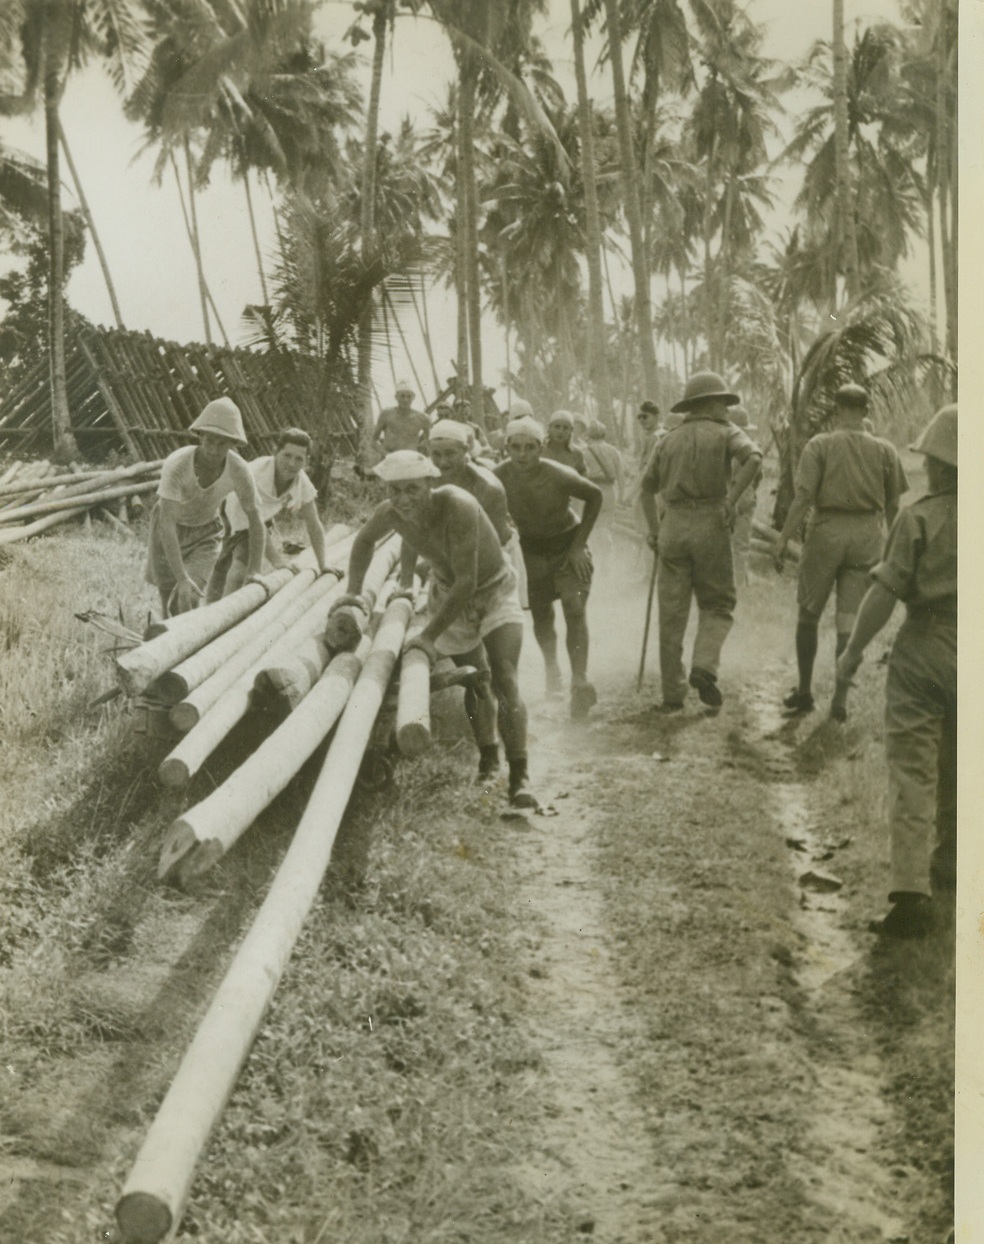 They’re Fighting for Britain, 12/11/41  Malaya – Men of a battalion of the Gordon Highlanders carry out construction work in the tropical jungle.  Yesterday British and Malayan troops fought Japanese on the beaches of Malaya, some 200 miles North of Singapore. Credit line (ACME);